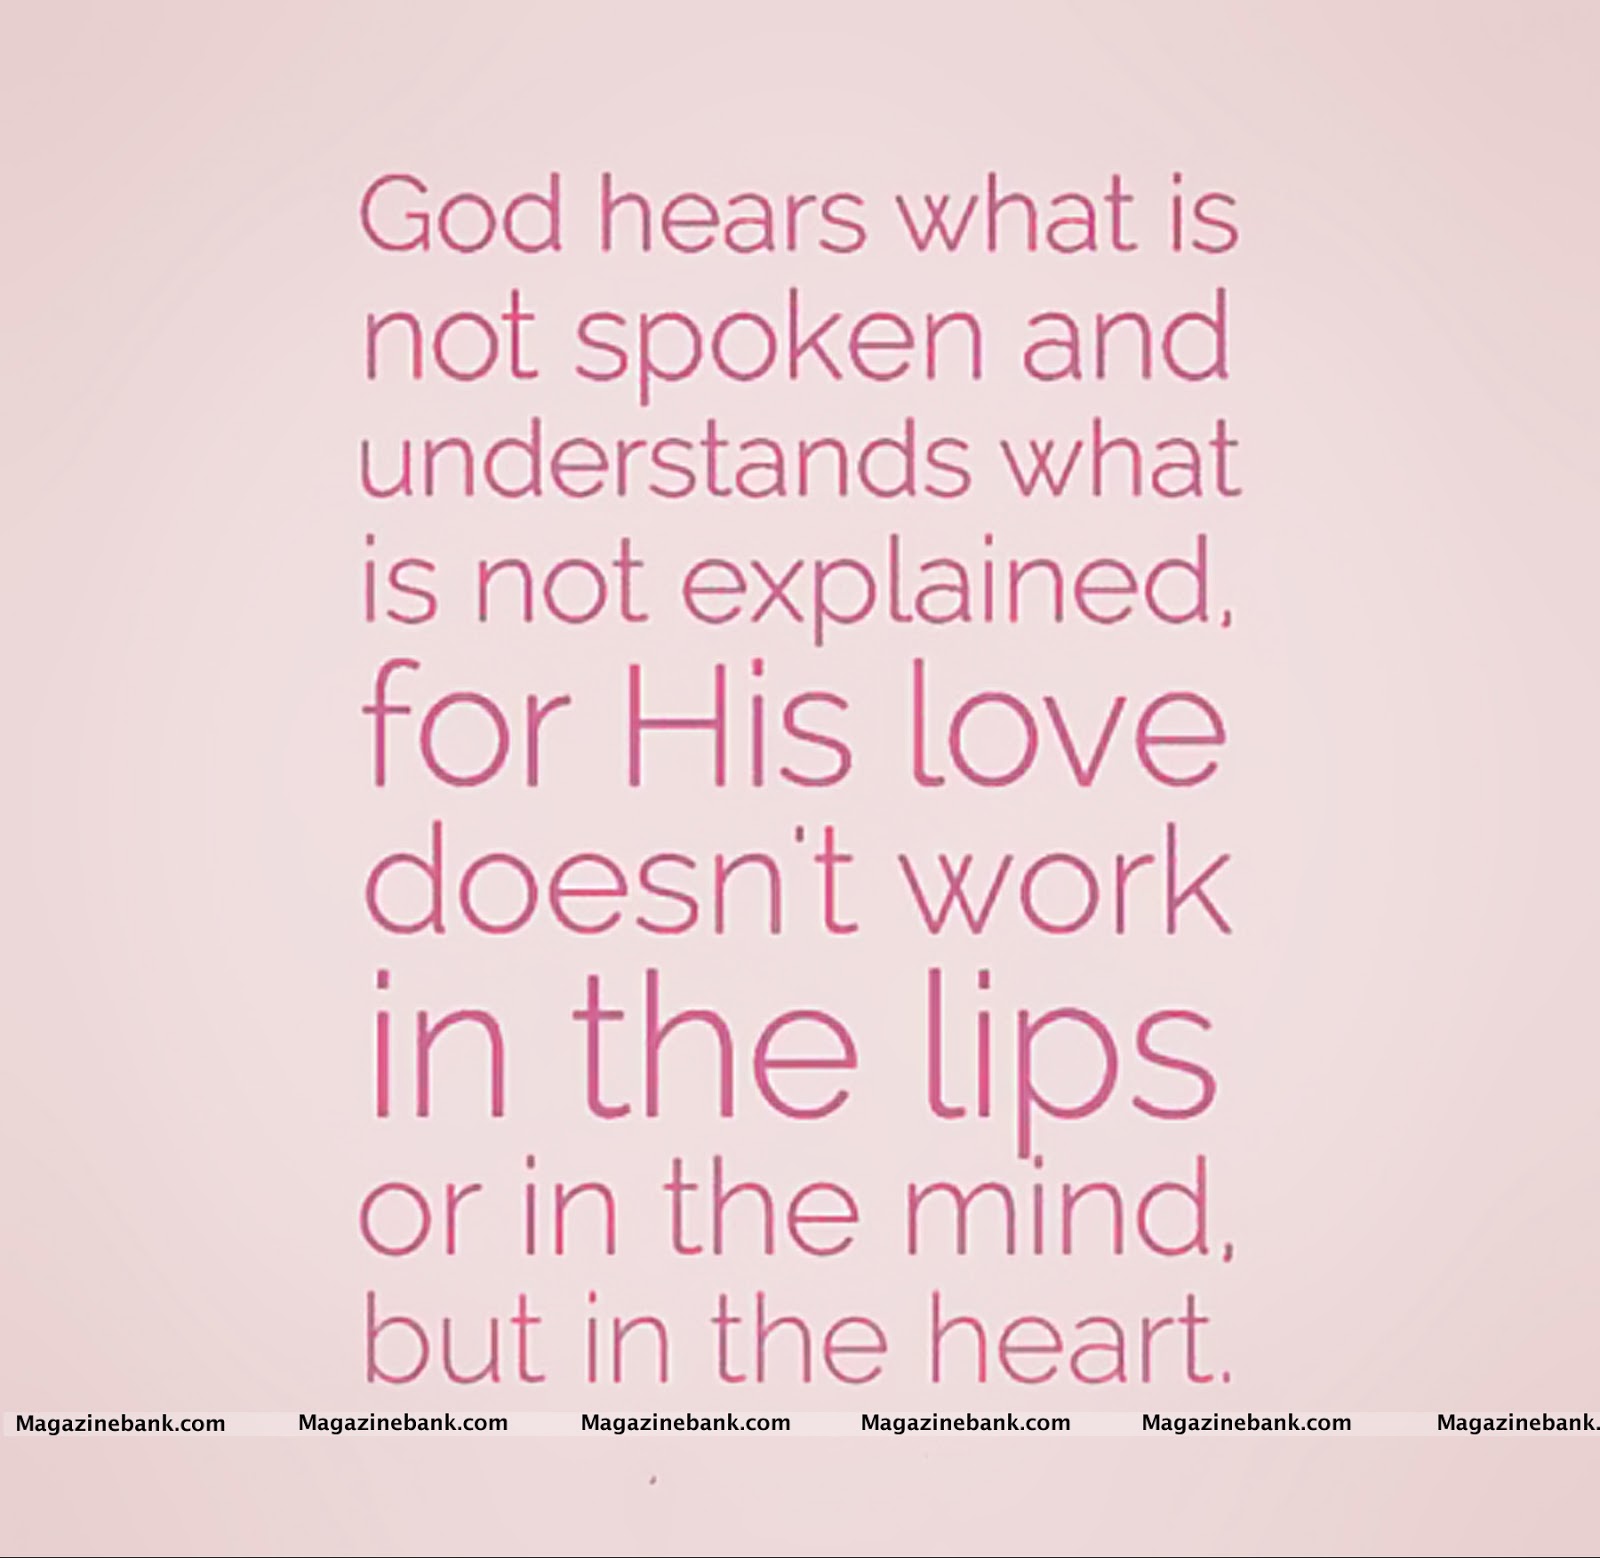 God hears what is not spoken and understands what is not explained, for His love doesn't work in the lips or in the mind, but in the heart